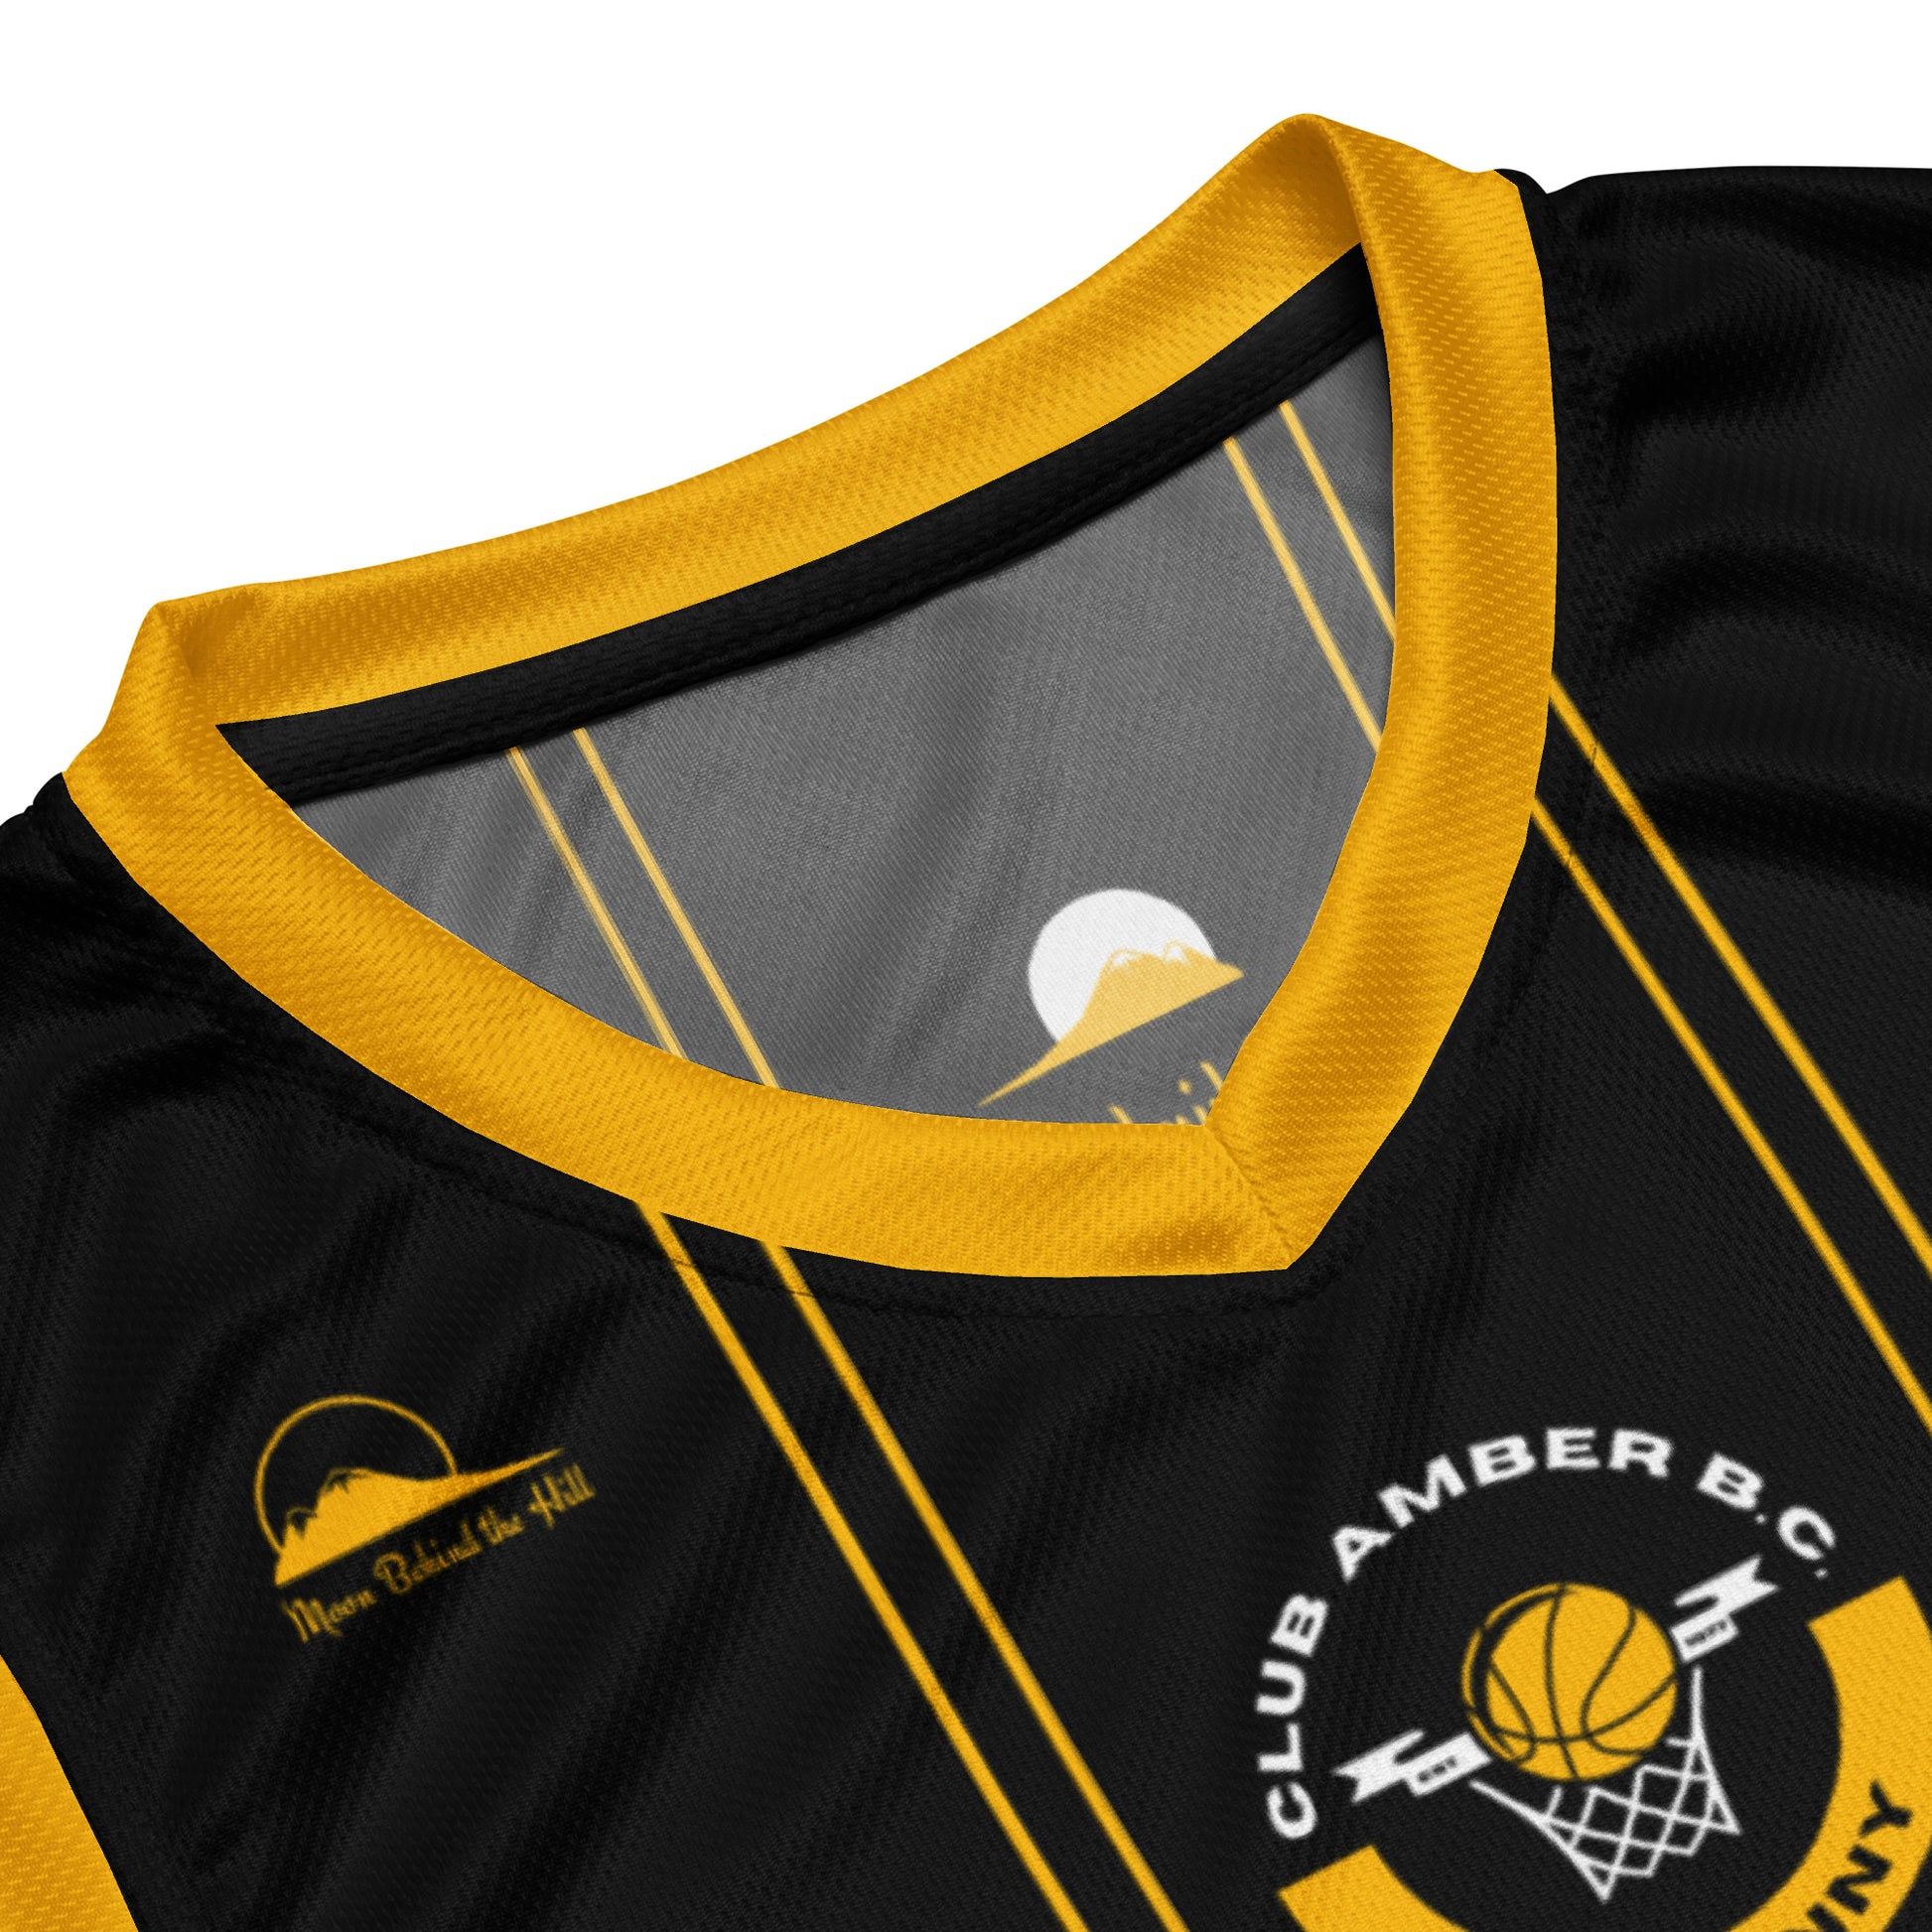 Club Amber #21 Unisex Basketball Jersey 2023 - Designed by Moon Behind The Hill Available to Buy at a Discounted Price on Moon Behind The Hill Online Designer Discount Store